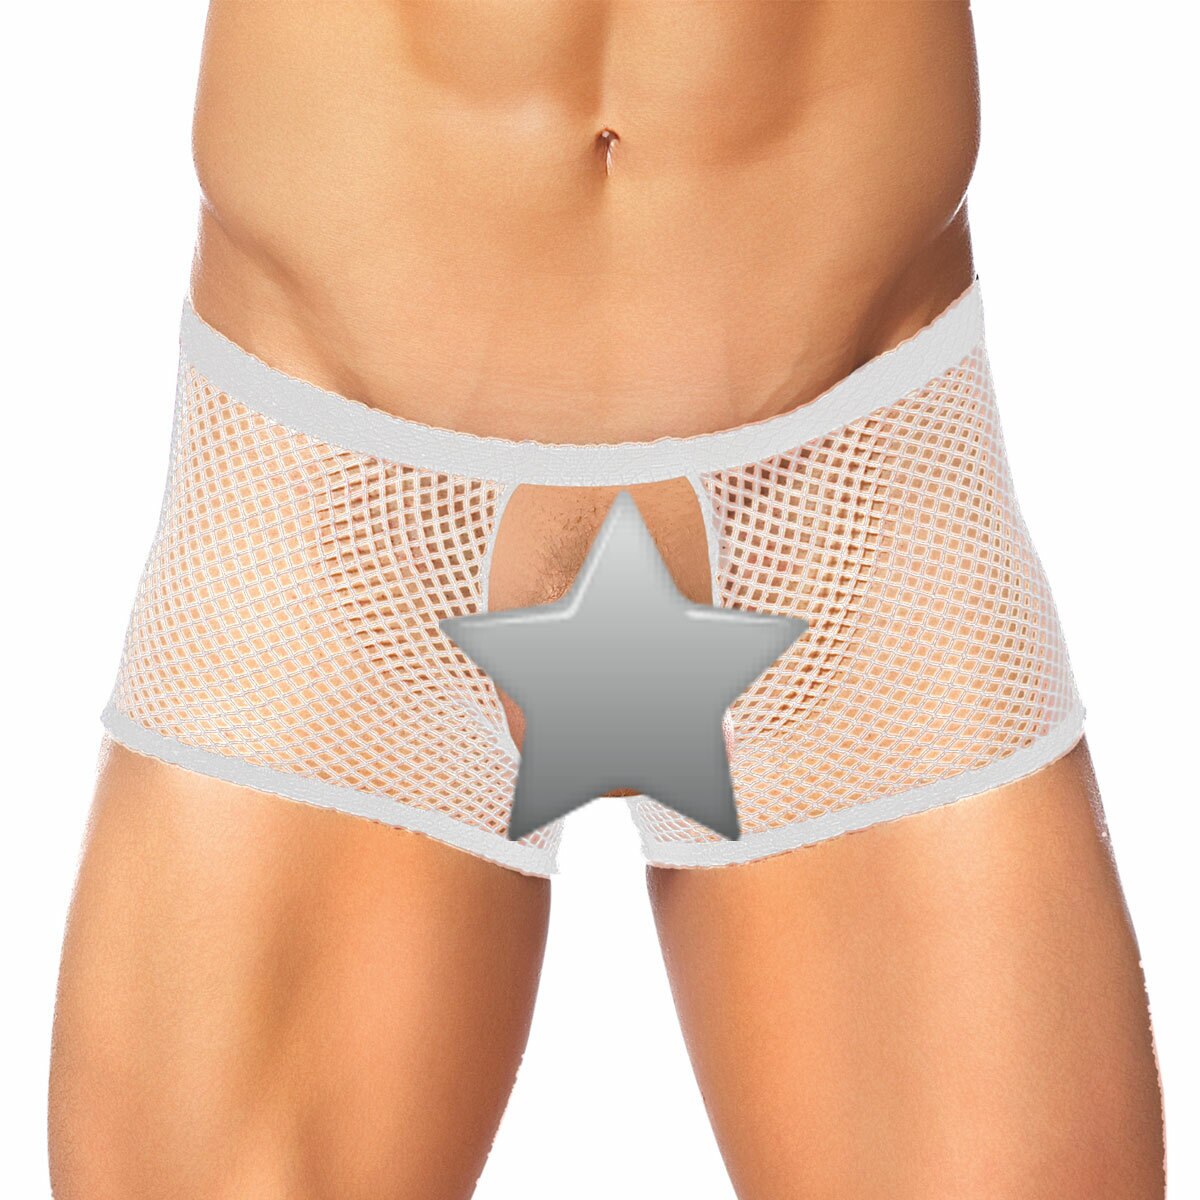 SALE - Peek a Buns Briefs with Open Front White